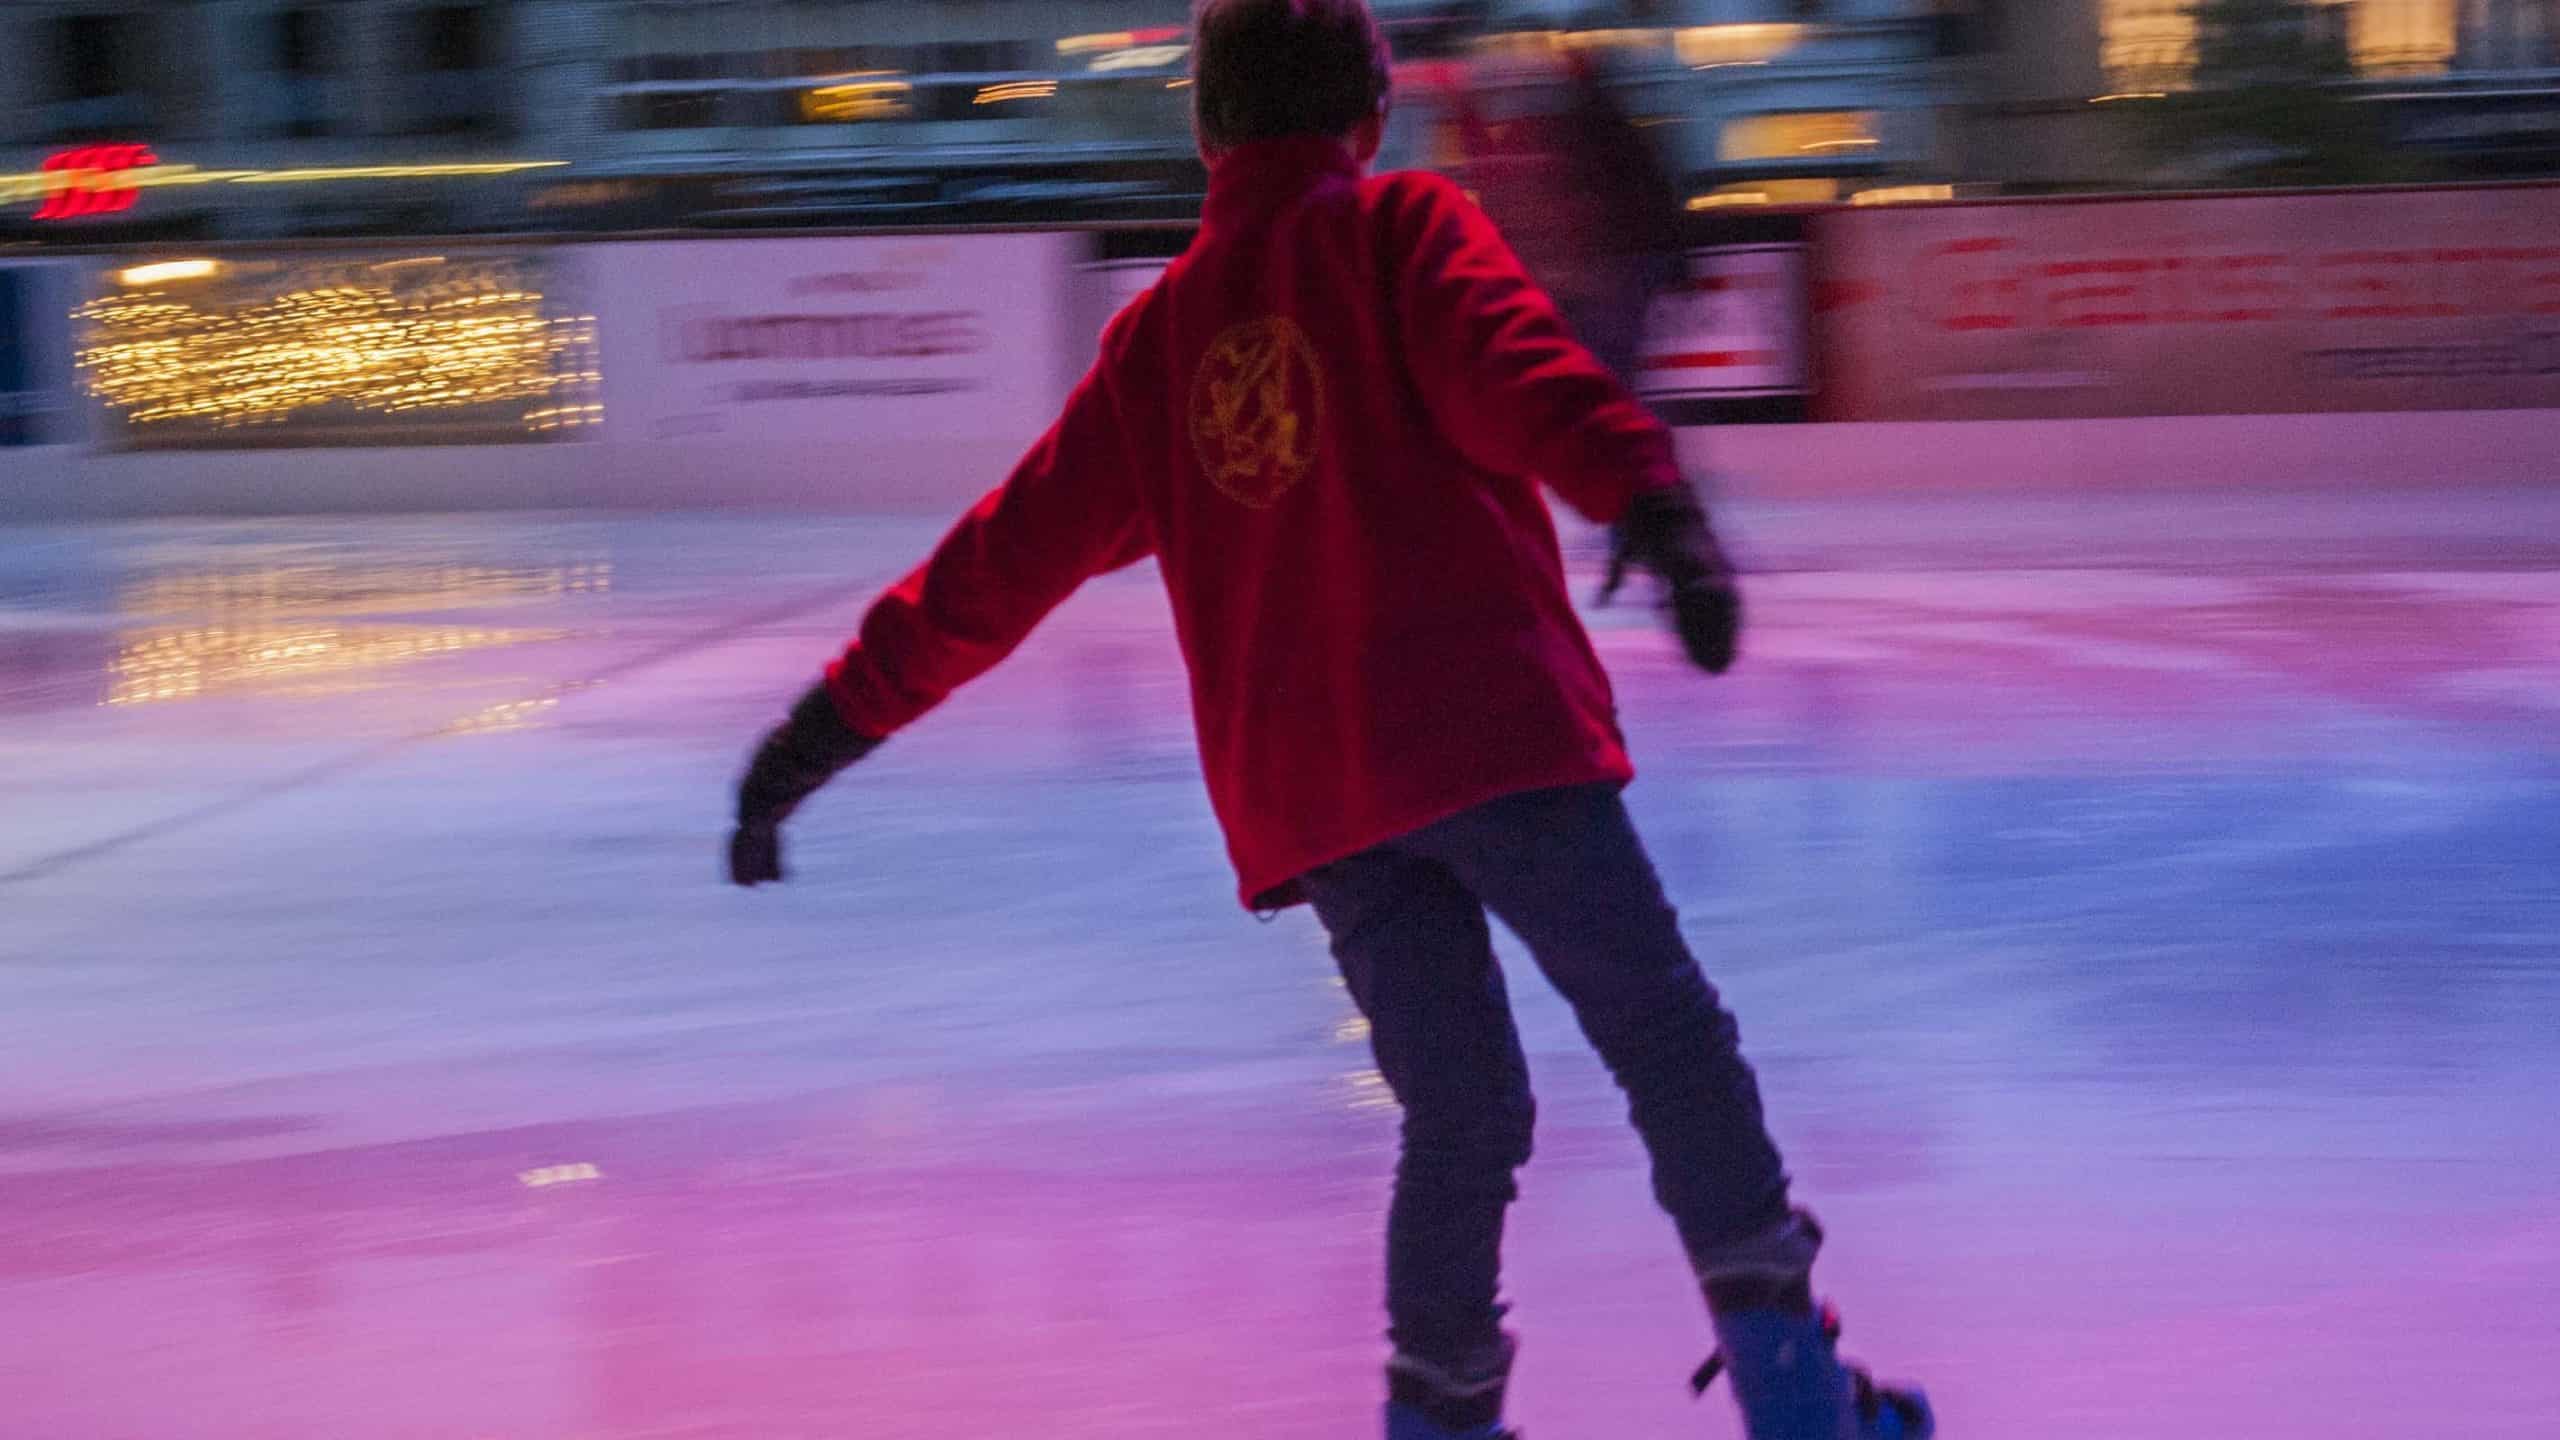 A young man ice skating. Creative Commons courtesy photo.